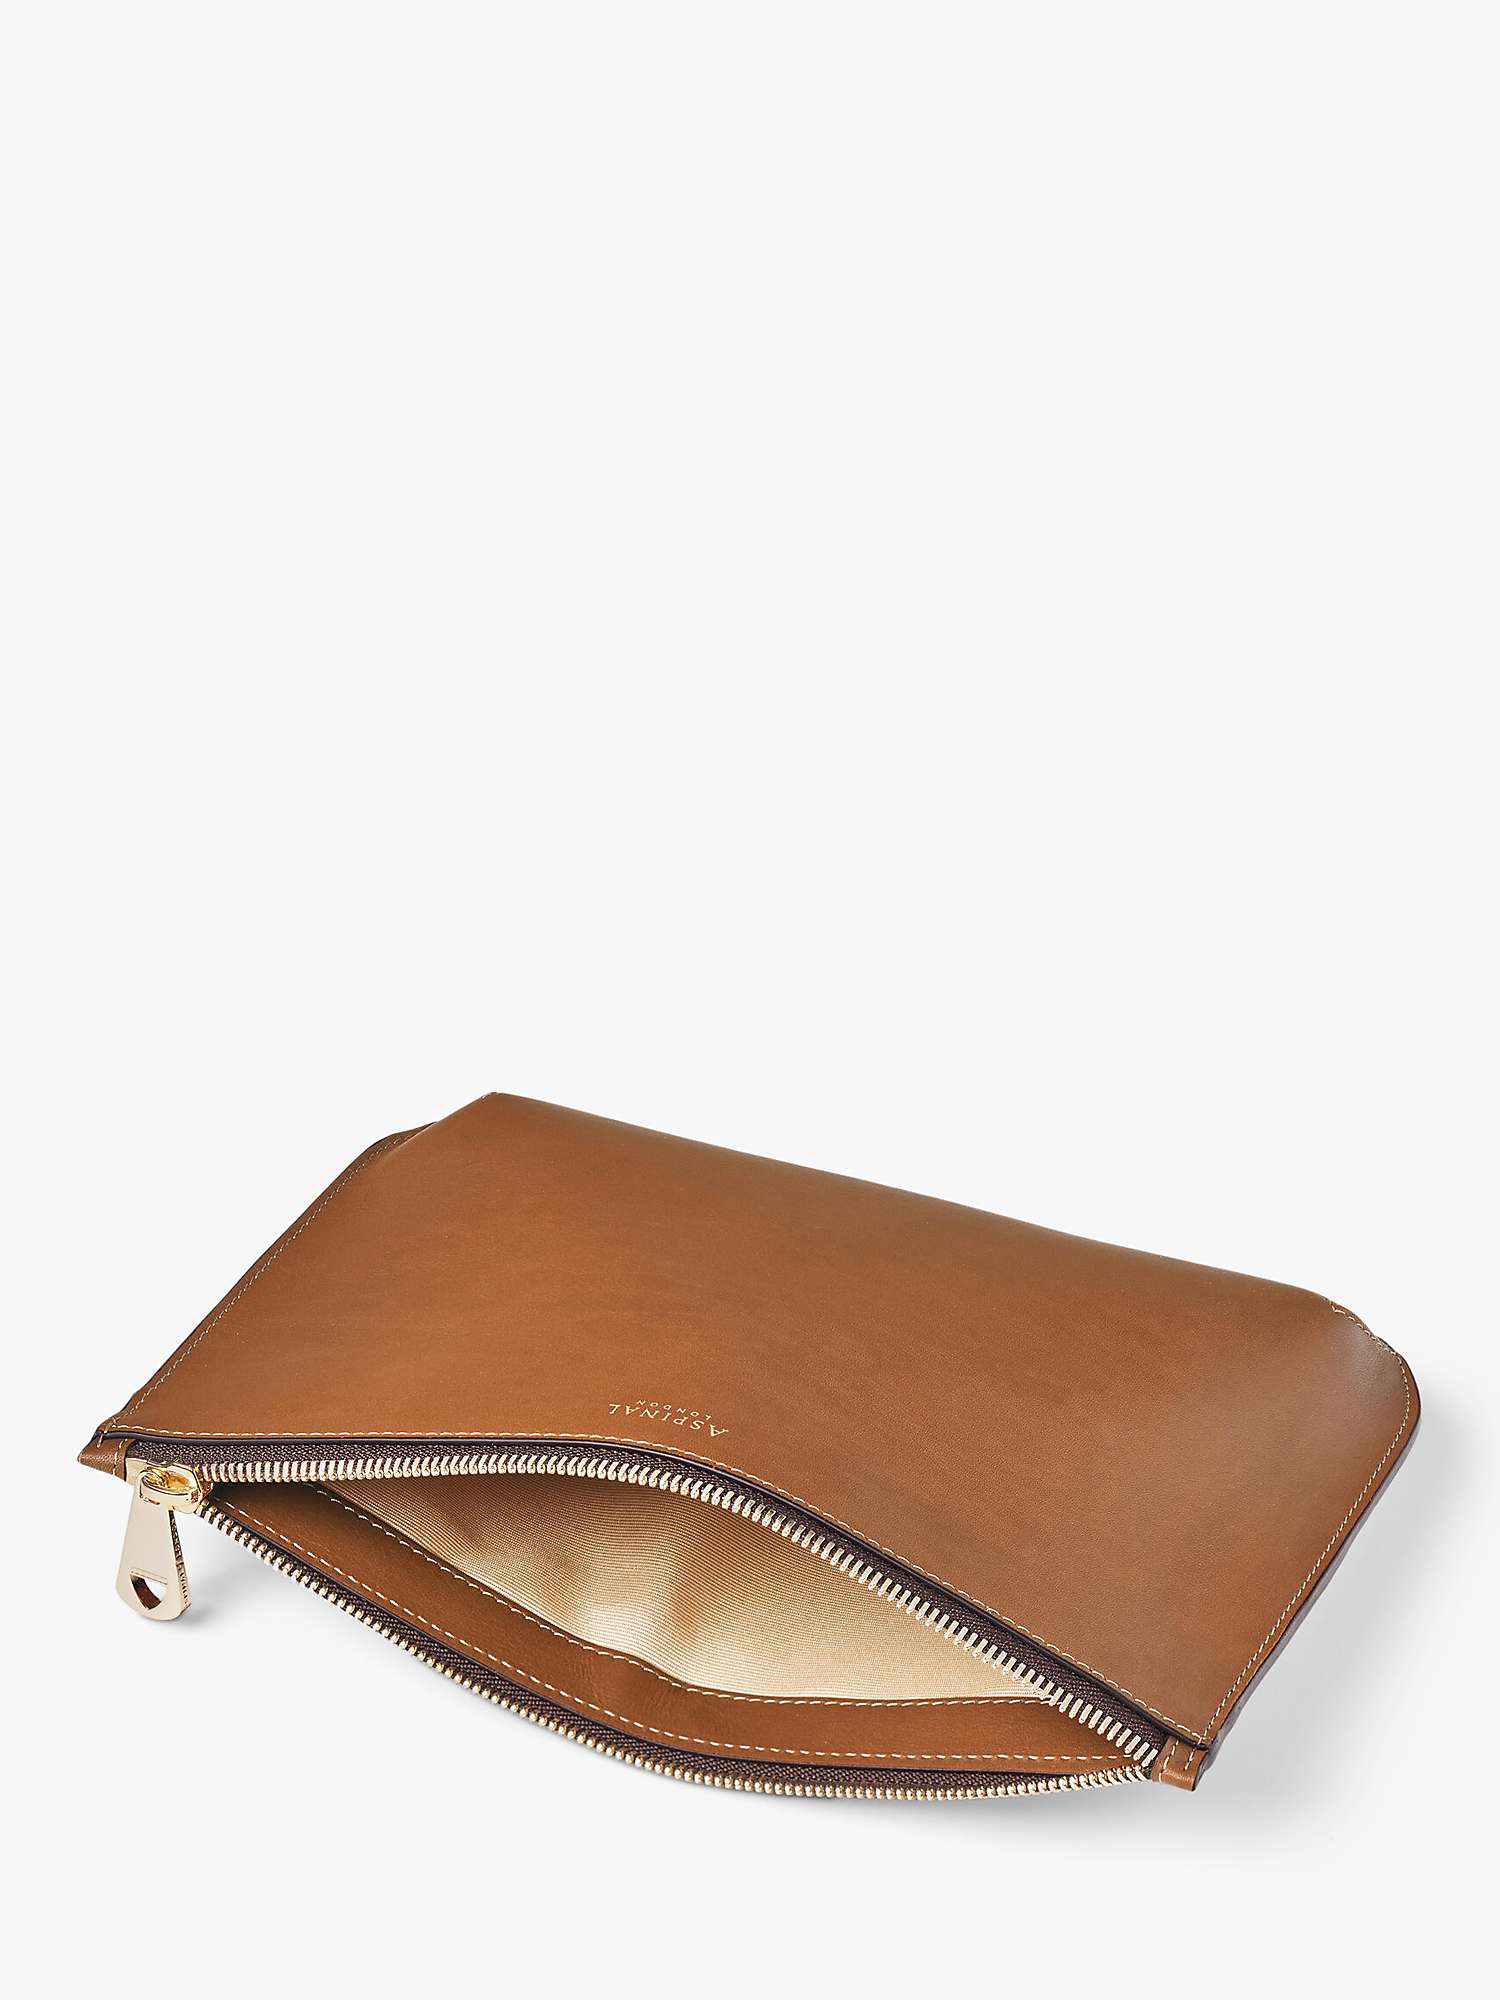 Buy Aspinal of London Ella Smooth Leather Large Pouch Purse Online at johnlewis.com